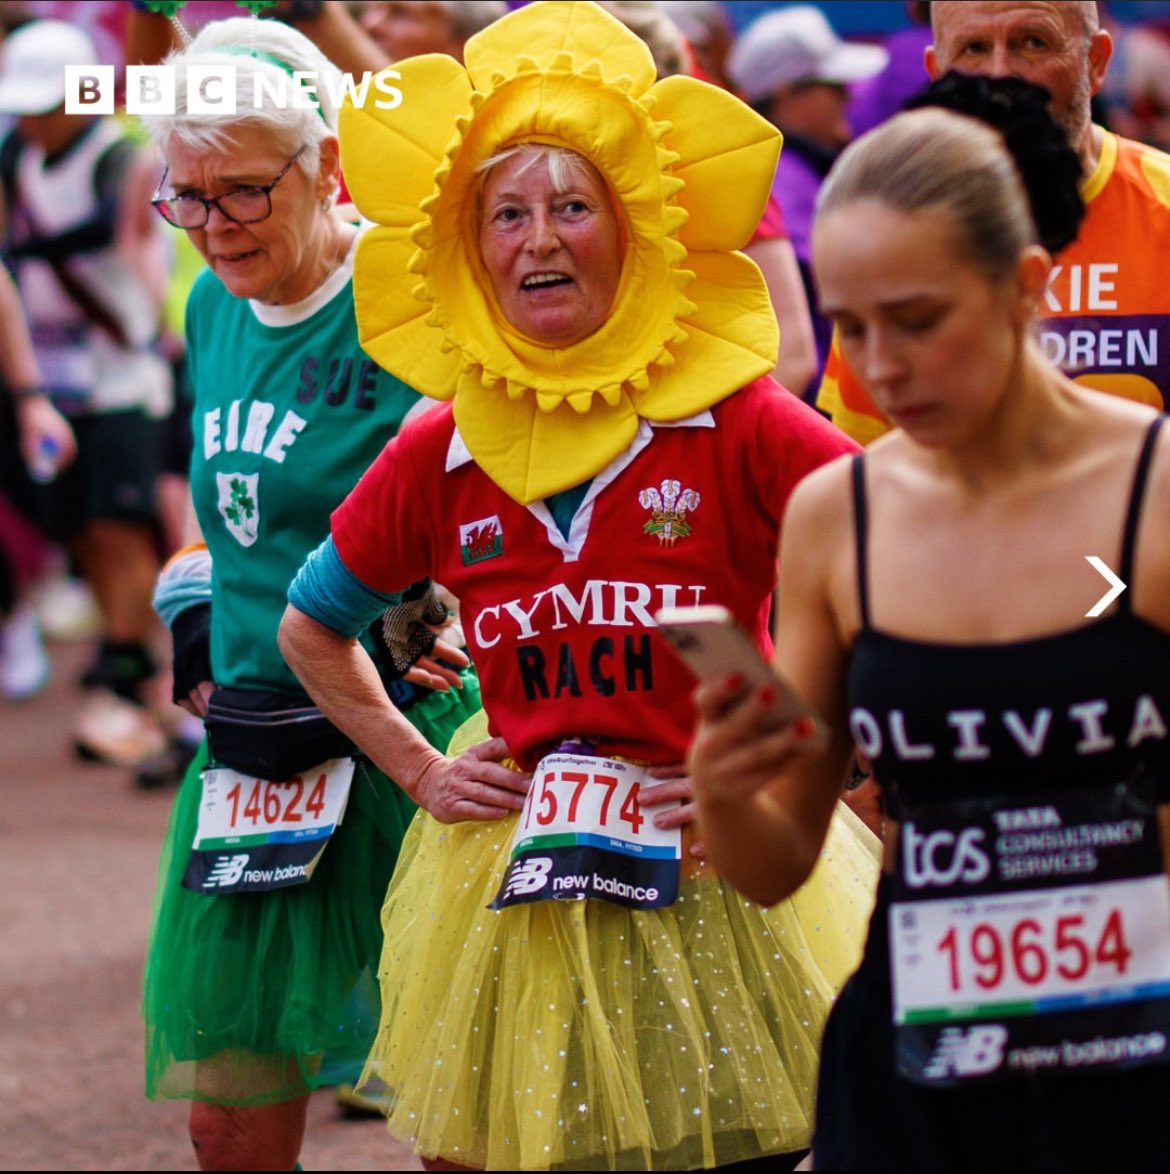 What an outfit at the @LondonMarathon 🏴󠁧󠁢󠁷󠁬󠁳󠁿🏴󠁧󠁢󠁷󠁬󠁳󠁿🏴󠁧󠁢󠁷󠁬󠁳󠁿